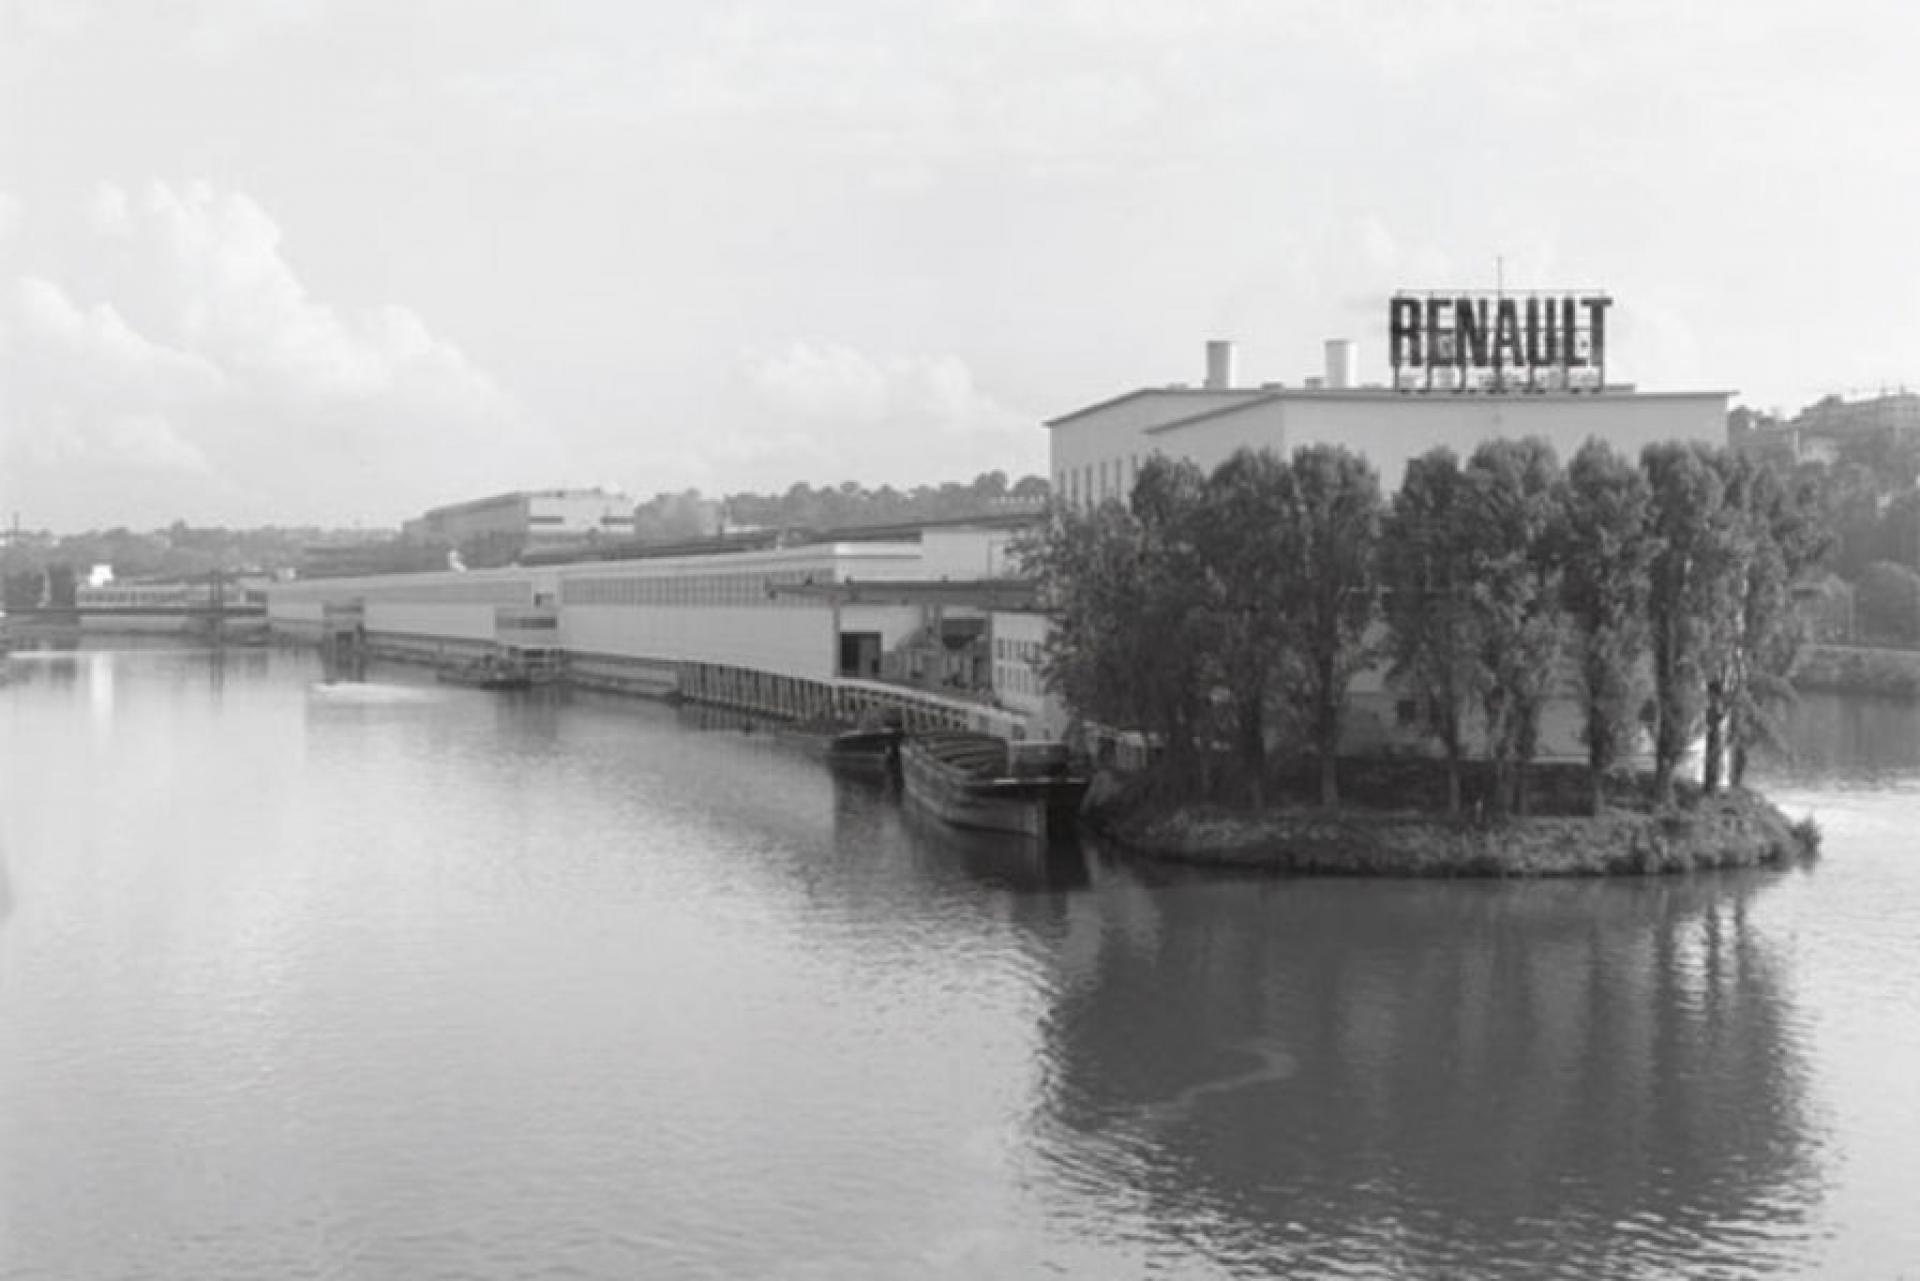 The building on the industrialized island on the river Seine. | Photo via Usine Nouvelle